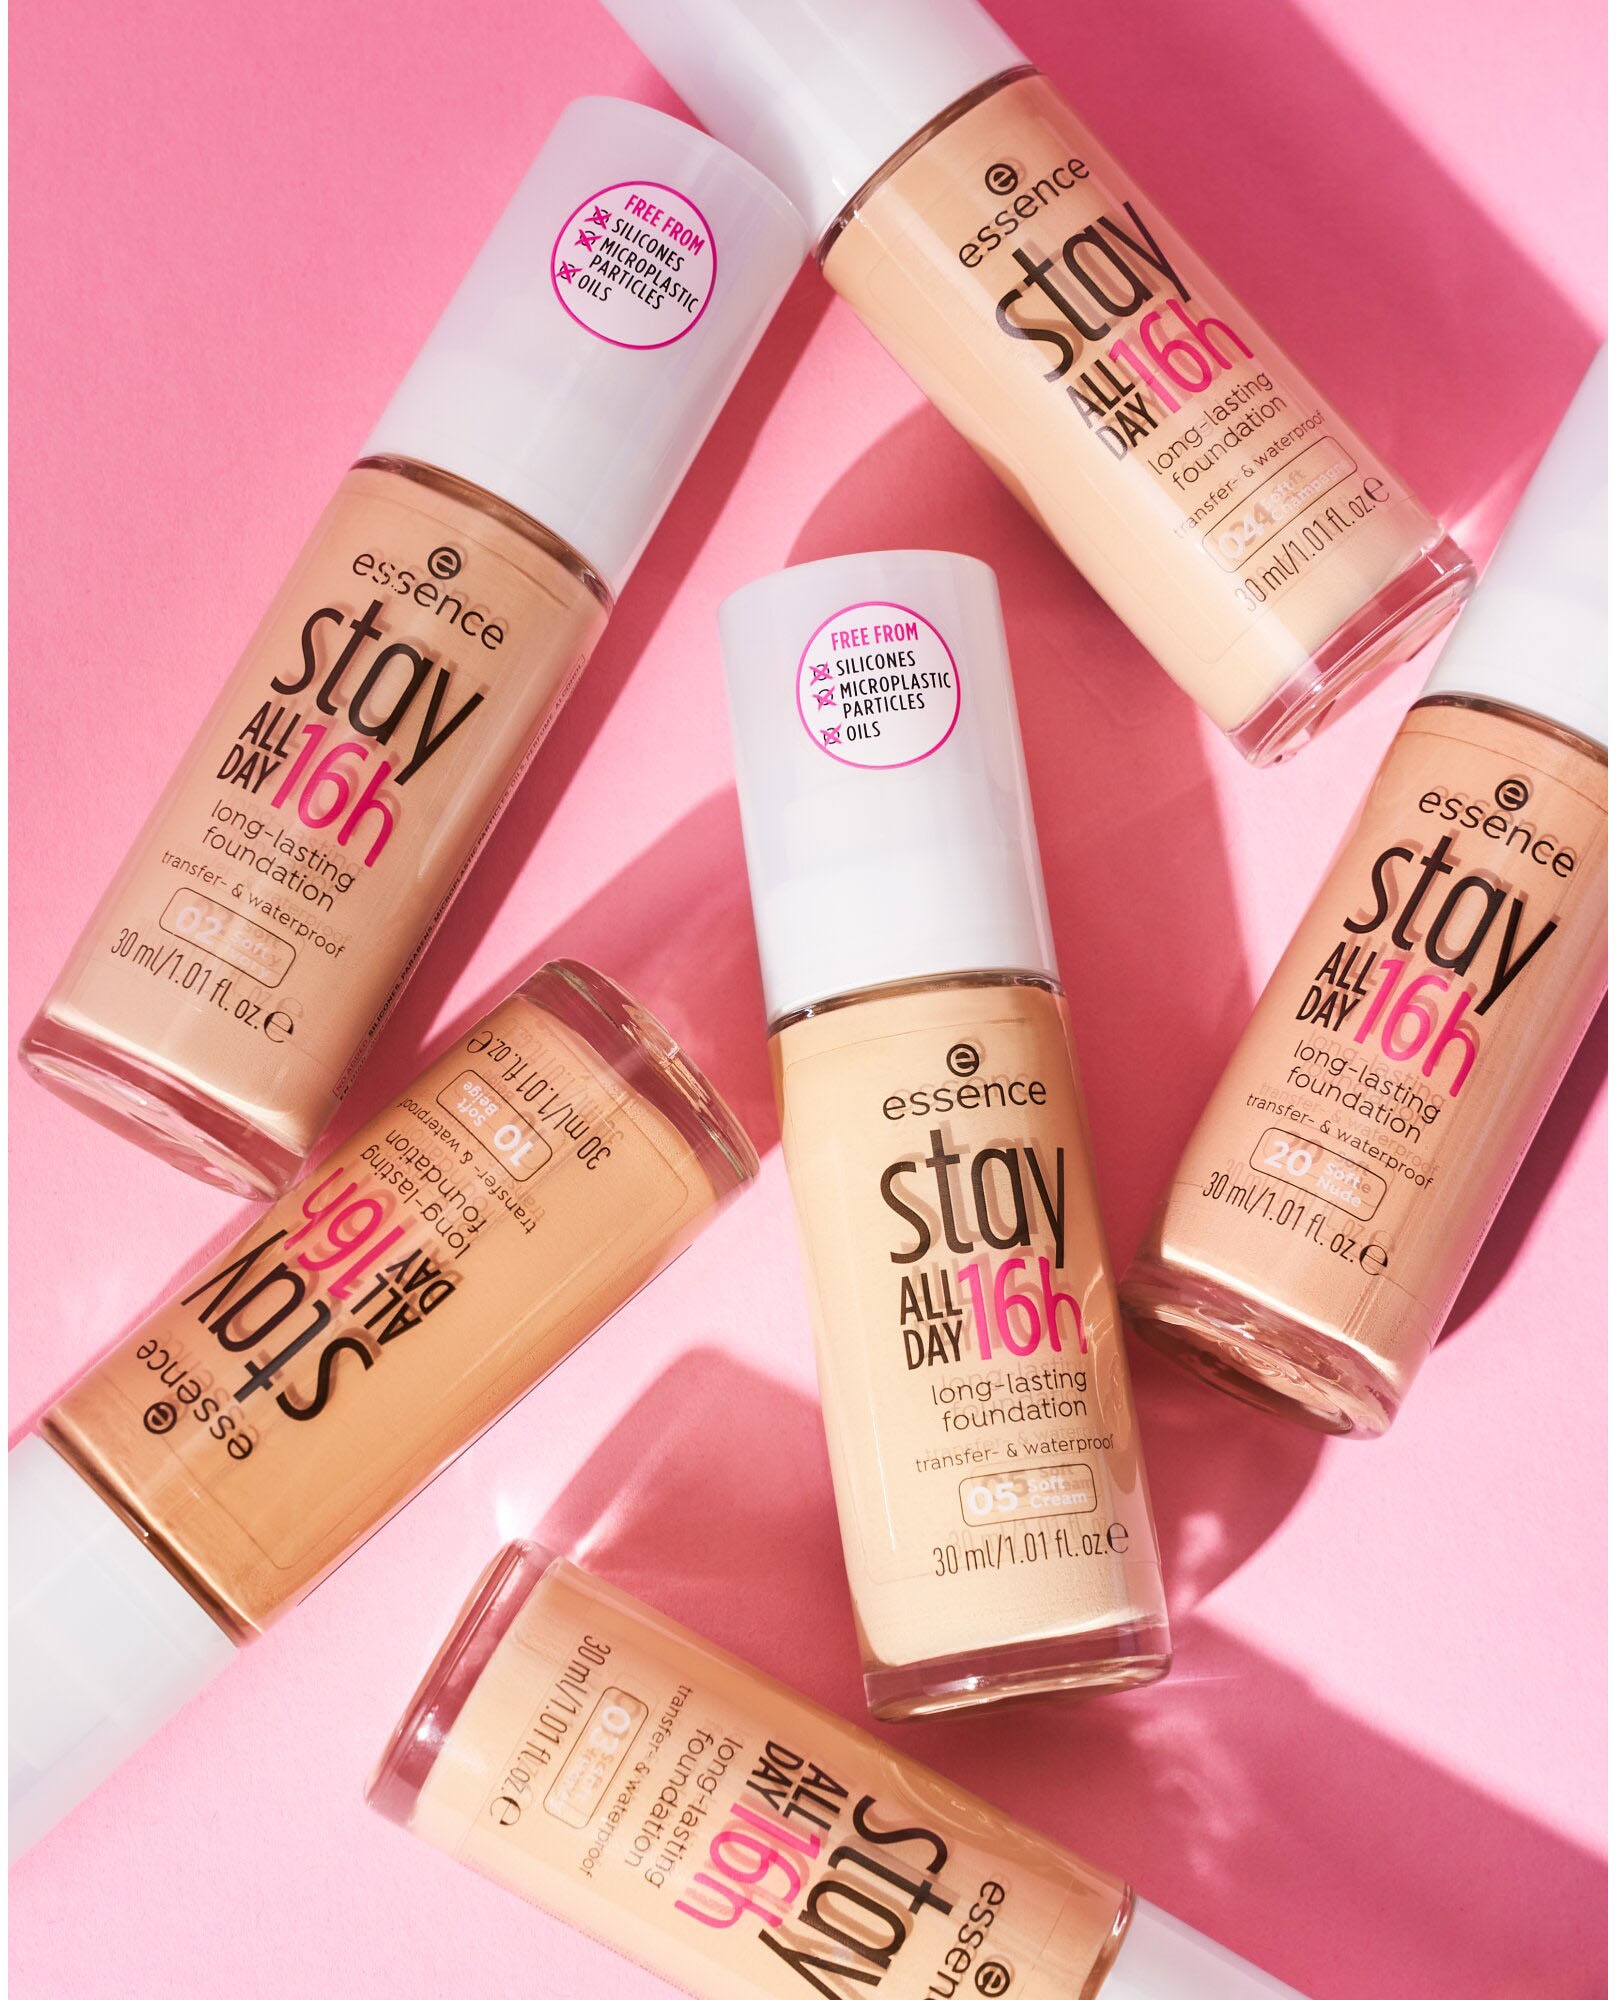 bei »stay long-lasting«, Essence ♕ (Set, tlg.) Foundation DAY 3 16h ALL